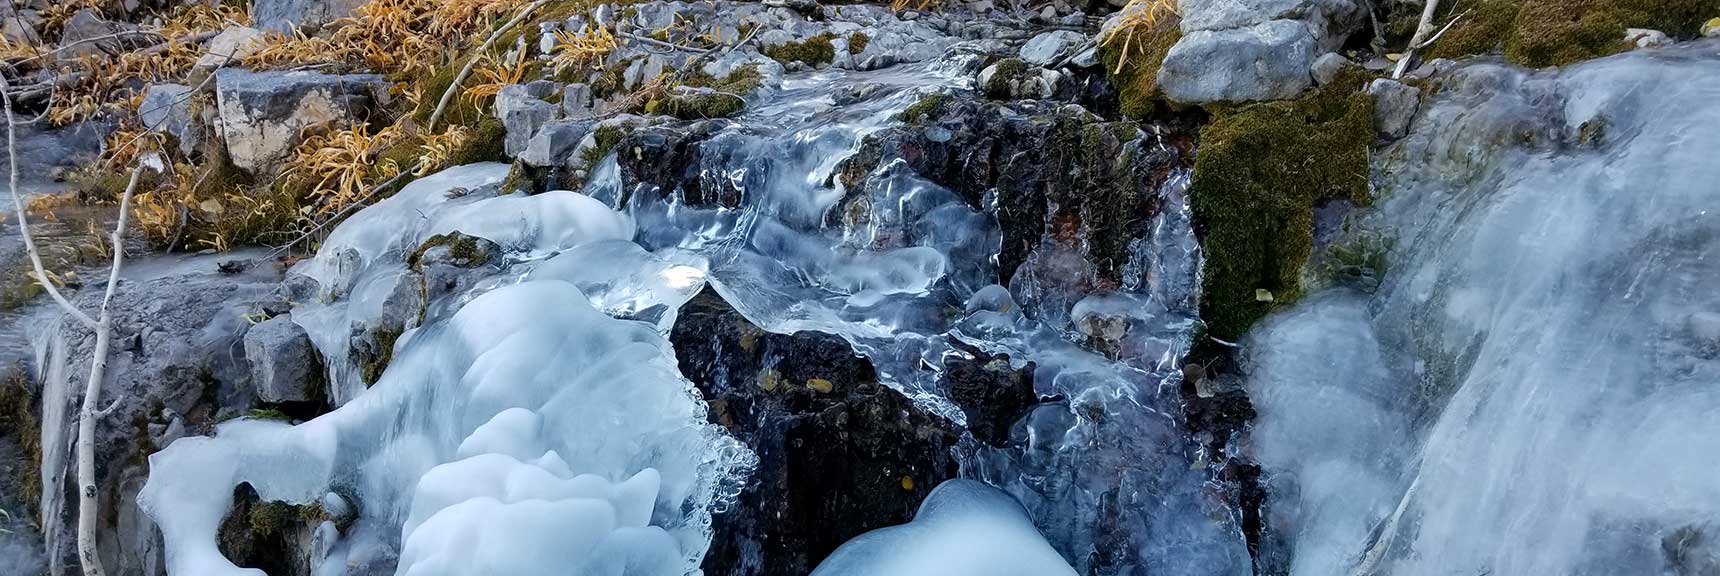 Frozen Mountain Stream and Ice Covered Rocks to Navigate In the Mountain Wash, Charleston Peak from Cathedral Rock, Spring Mountains, Nevada